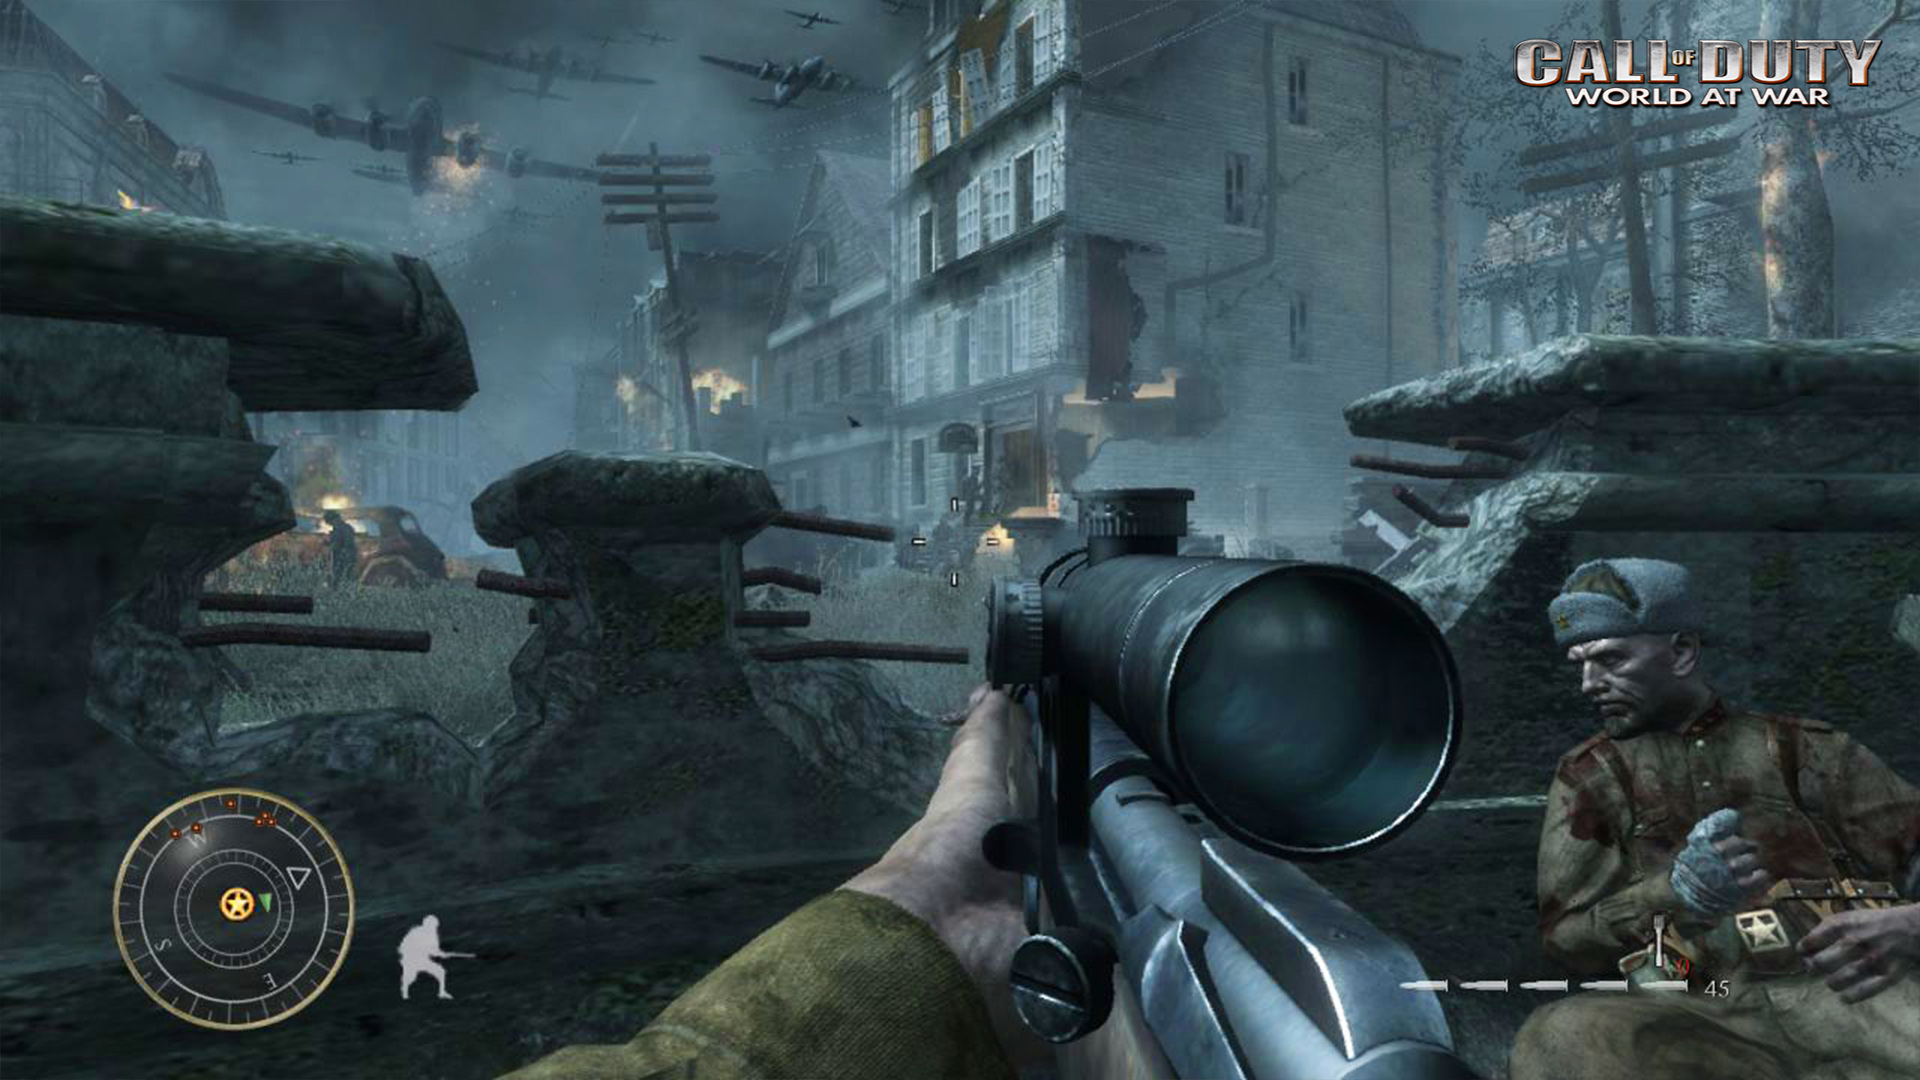 call of duty world war 2 co-op campaign pc